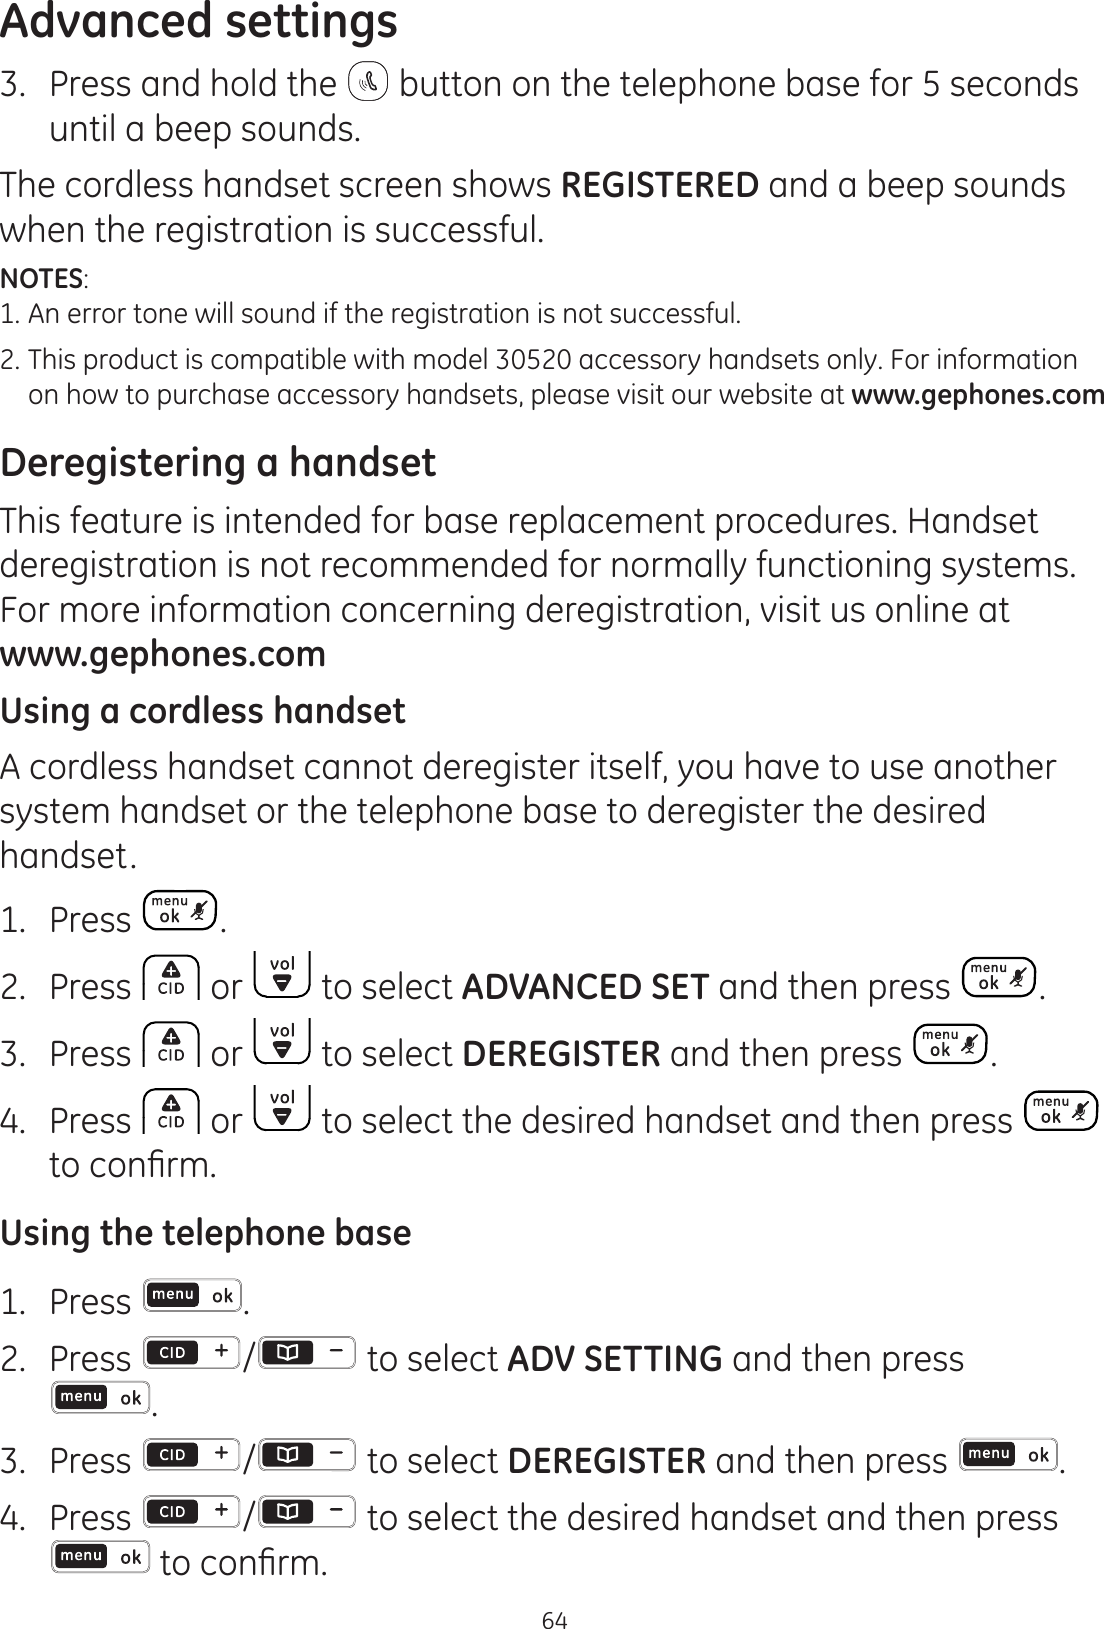 Advanced settings643.  Press and hold the   button on the telephone base for 5 seconds until a beep sounds. The cordless handset screen shows REGISTERED and a beep sounds when the registration is successful.NOTES: 1. An error tone will sound if the registration is not successful.2.  This product is compatible with model 30520 accessory handsets only. For information    on how to purchase accessory handsets, please visit our website at www.gephones.com Deregistering a handsetThis feature is intended for base replacement procedures. Handset deregistration is not recommended for normally functioning systems. For more information concerning deregistration, visit us online at  www.gephones.com Using a cordless handsetA cordless handset cannot deregister itself, you have to use another system handset or the telephone base to deregister the desired handset.1.  Press .2.  Press   or   to select ADVANCED SET and then press  .3.  Press   or   to select DEREGISTER and then press  .4.  Press   or   to select the desired handset and then press   WRFRQ¿UPUsing the telephone base1.  Press  .2.  Press  /  to select ADV SETTING and then press  .3.  Press  /  to select DEREGISTER and then press  .4.  Press  /  to select the desired handset and then press WRFRQ¿UP